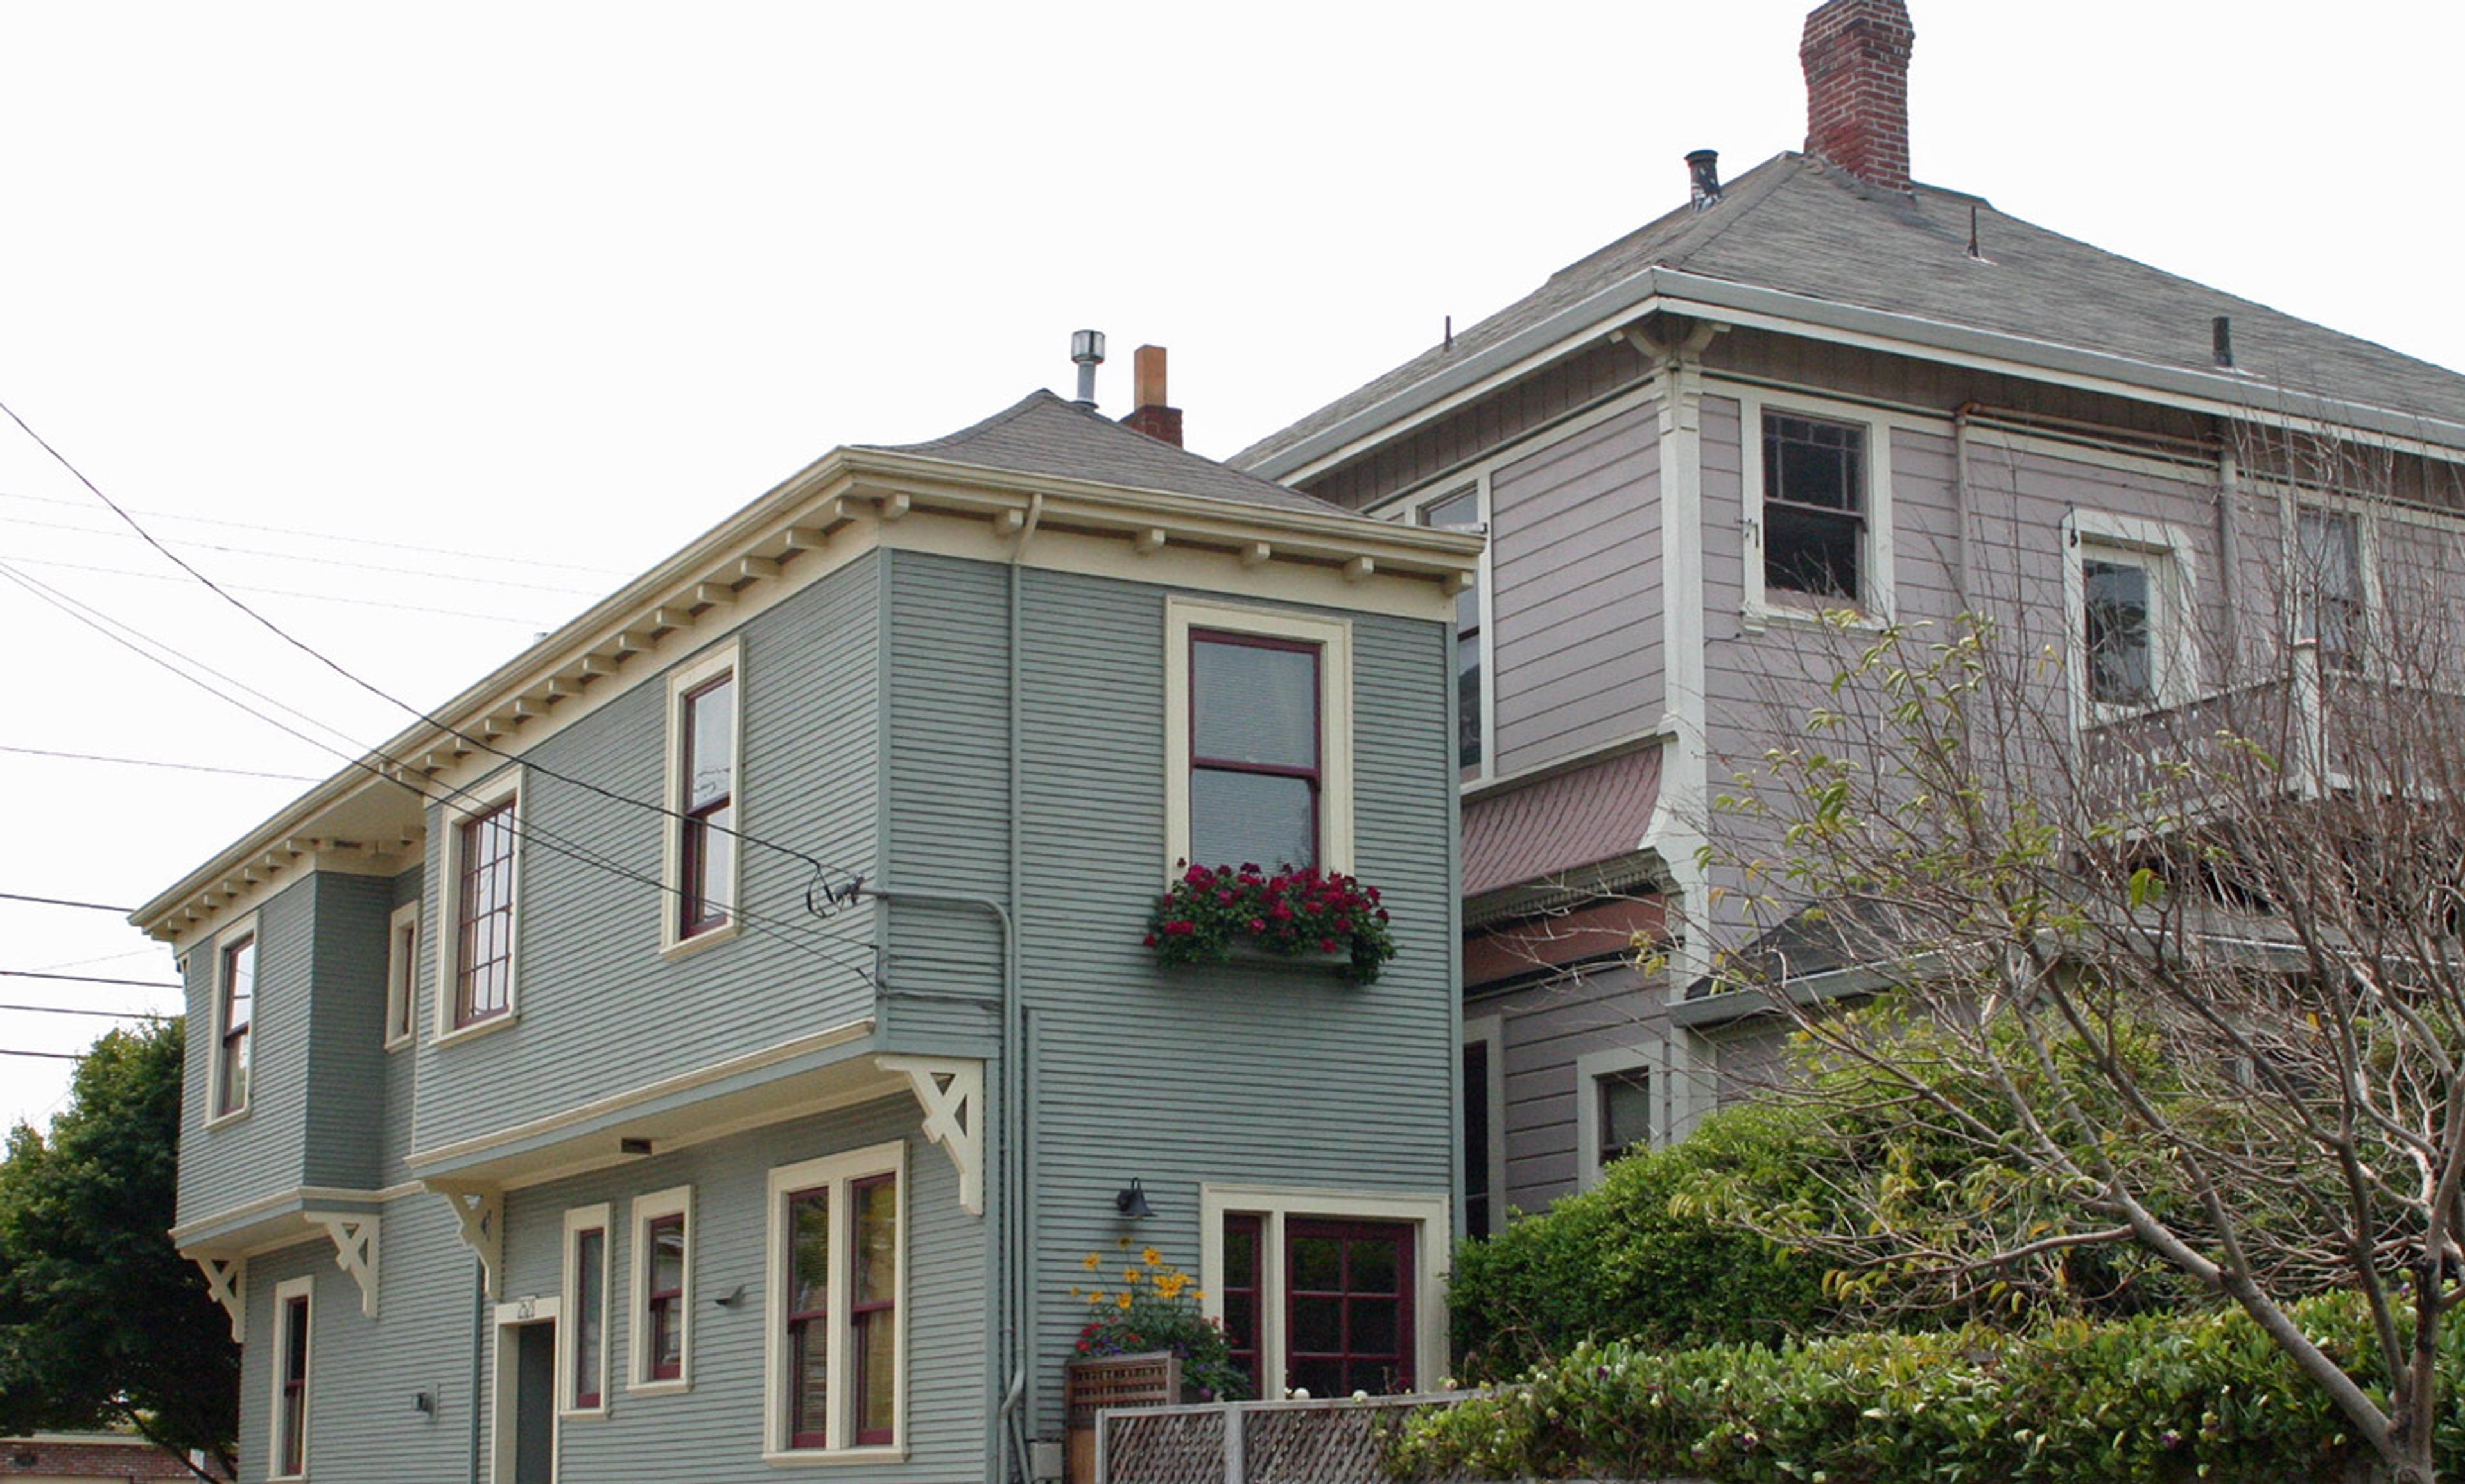 <p>The Alameda Spite House, California (1908). Disgruntled carpenter Charles Froling constructed the house on the thin strip of land that remained after the city, helped by his neighbour, requisitioned the plot for road building. <em>Photo by Elf/Wikimedia</em></p>